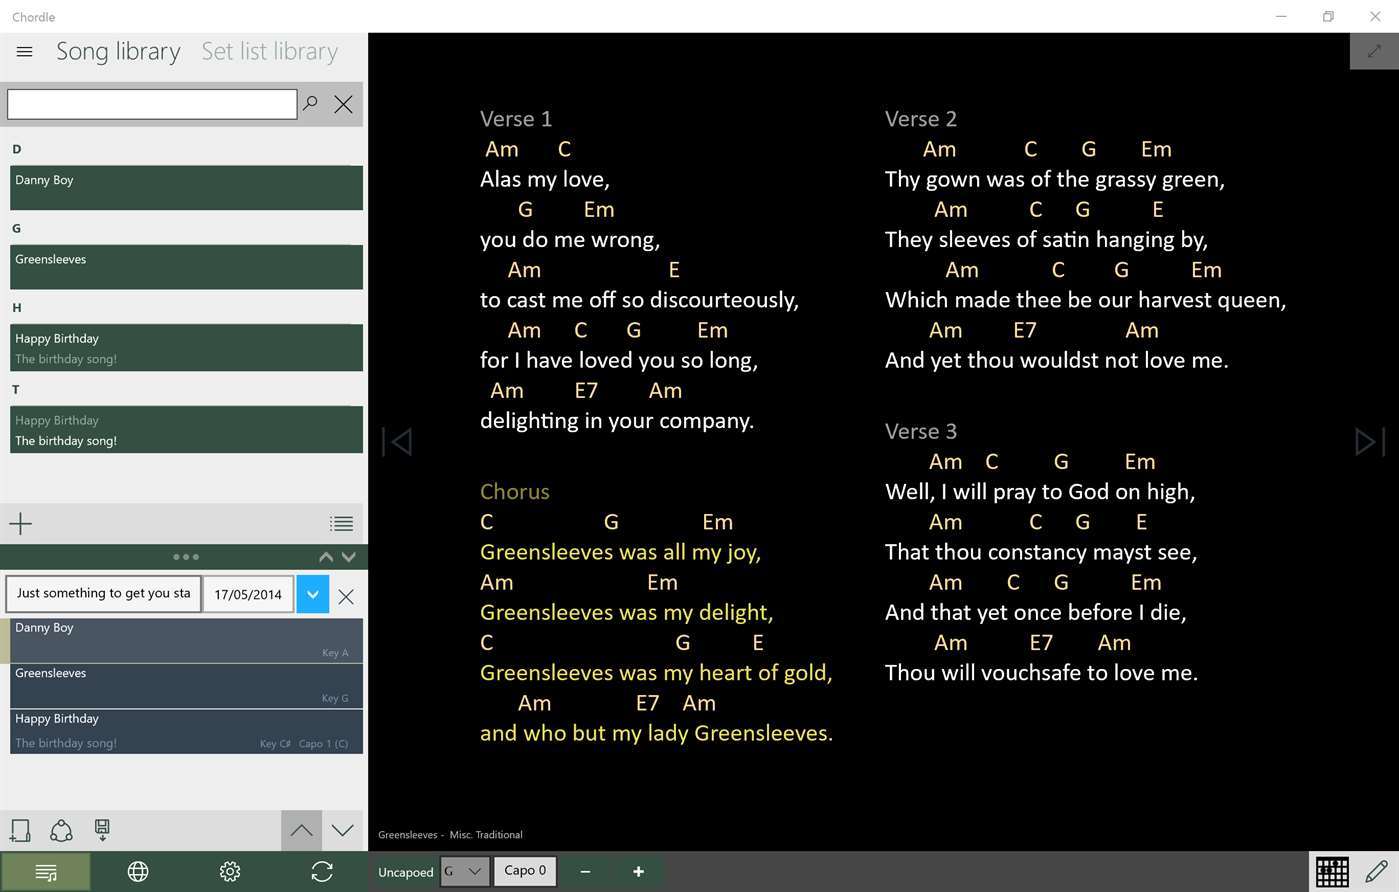 The 3 best songbook apps to download for Windows PC